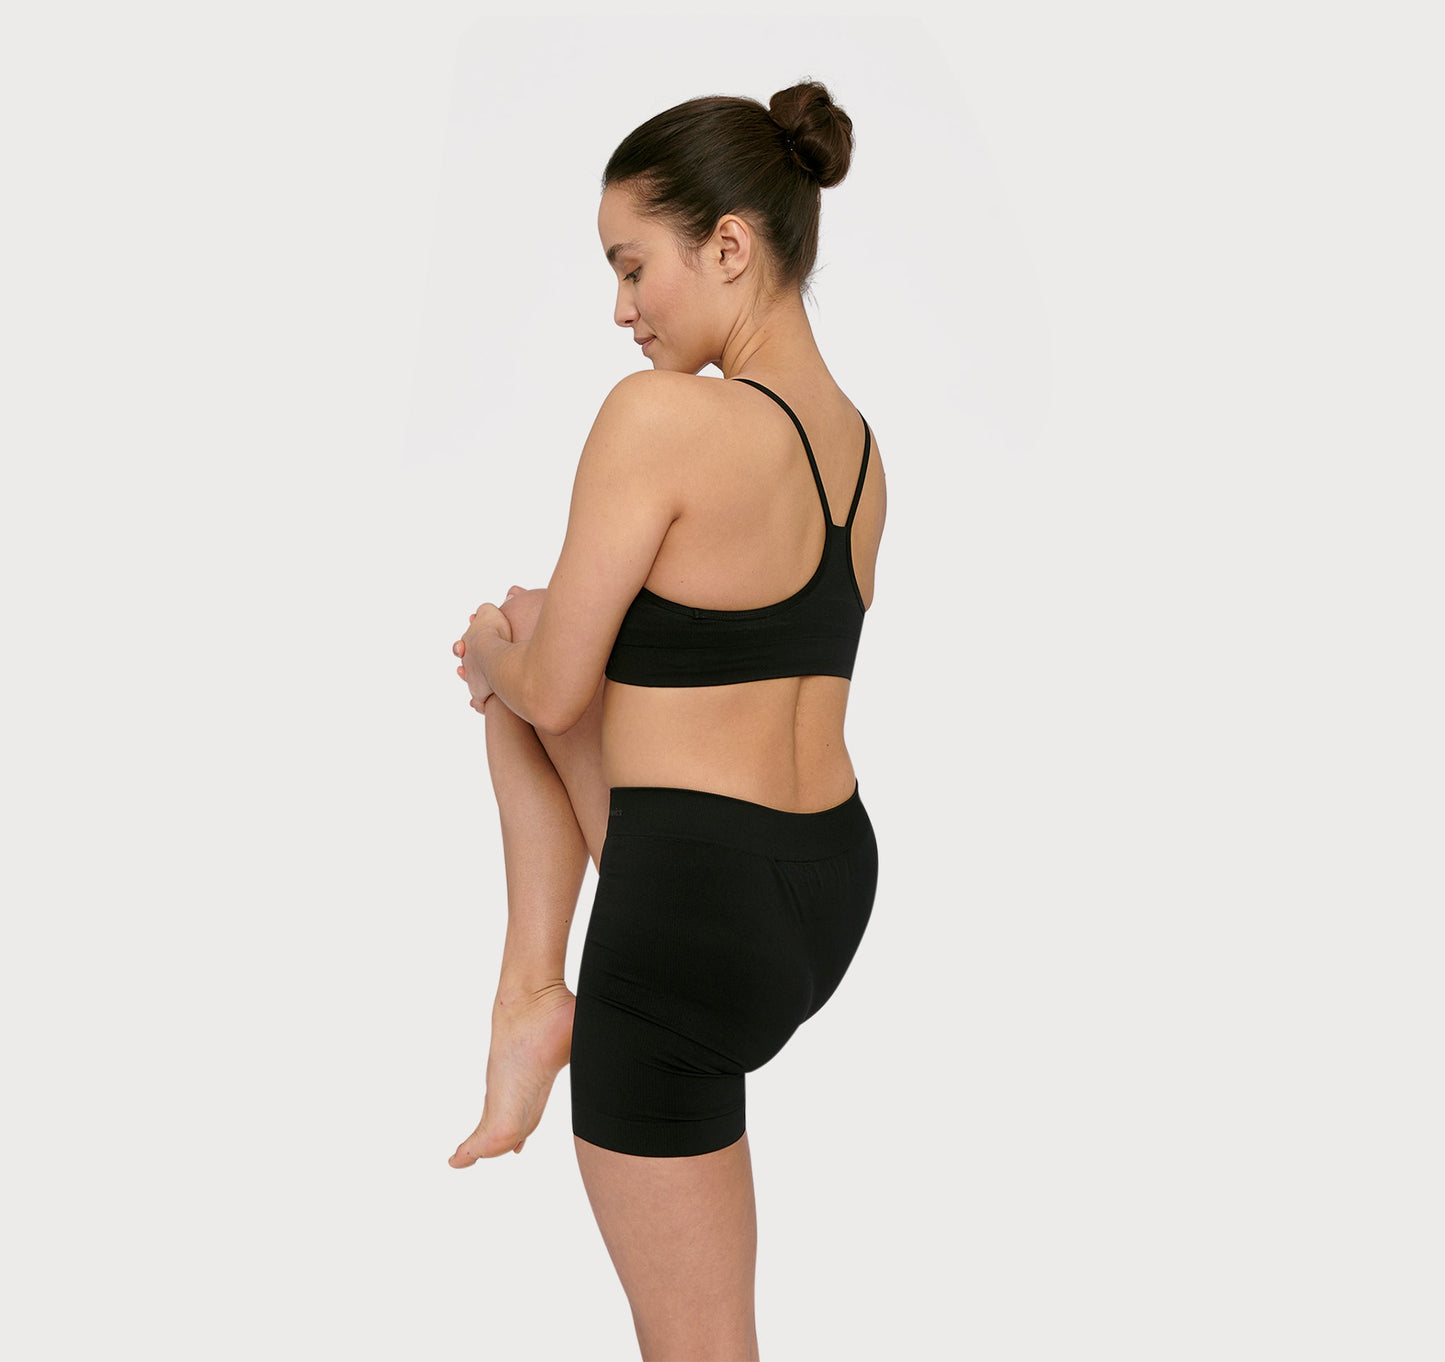 Buy Active Yoga Shorts, Fast Delivery